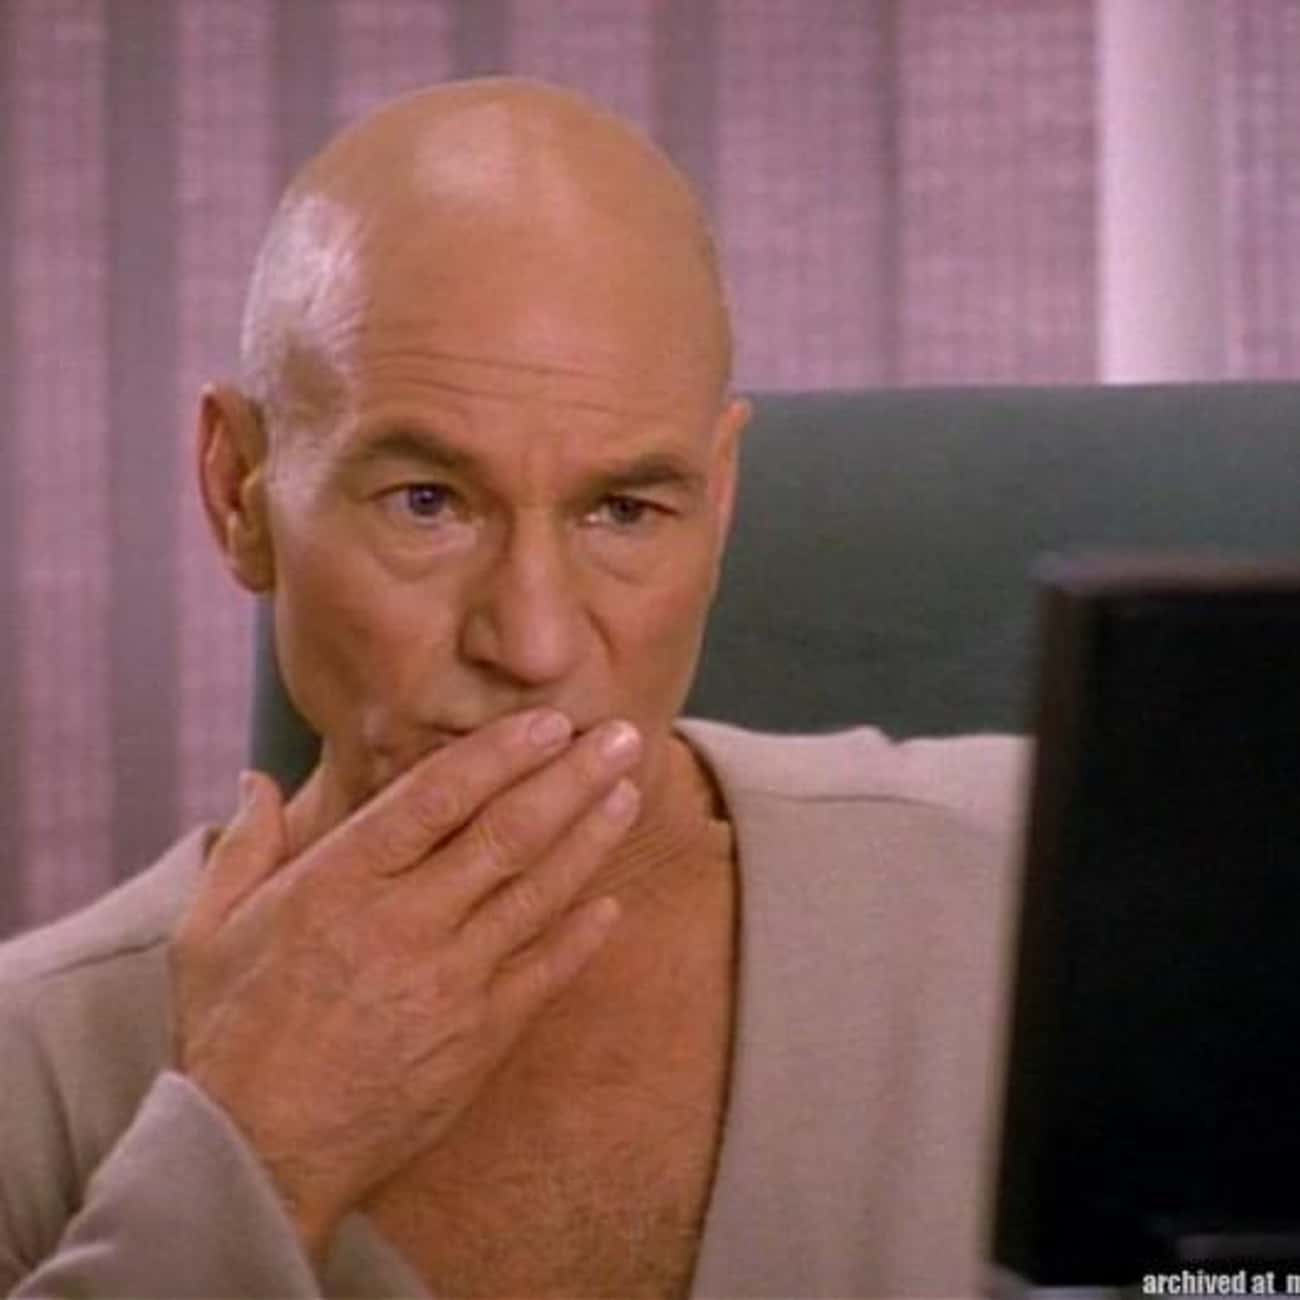 Saucy Picard